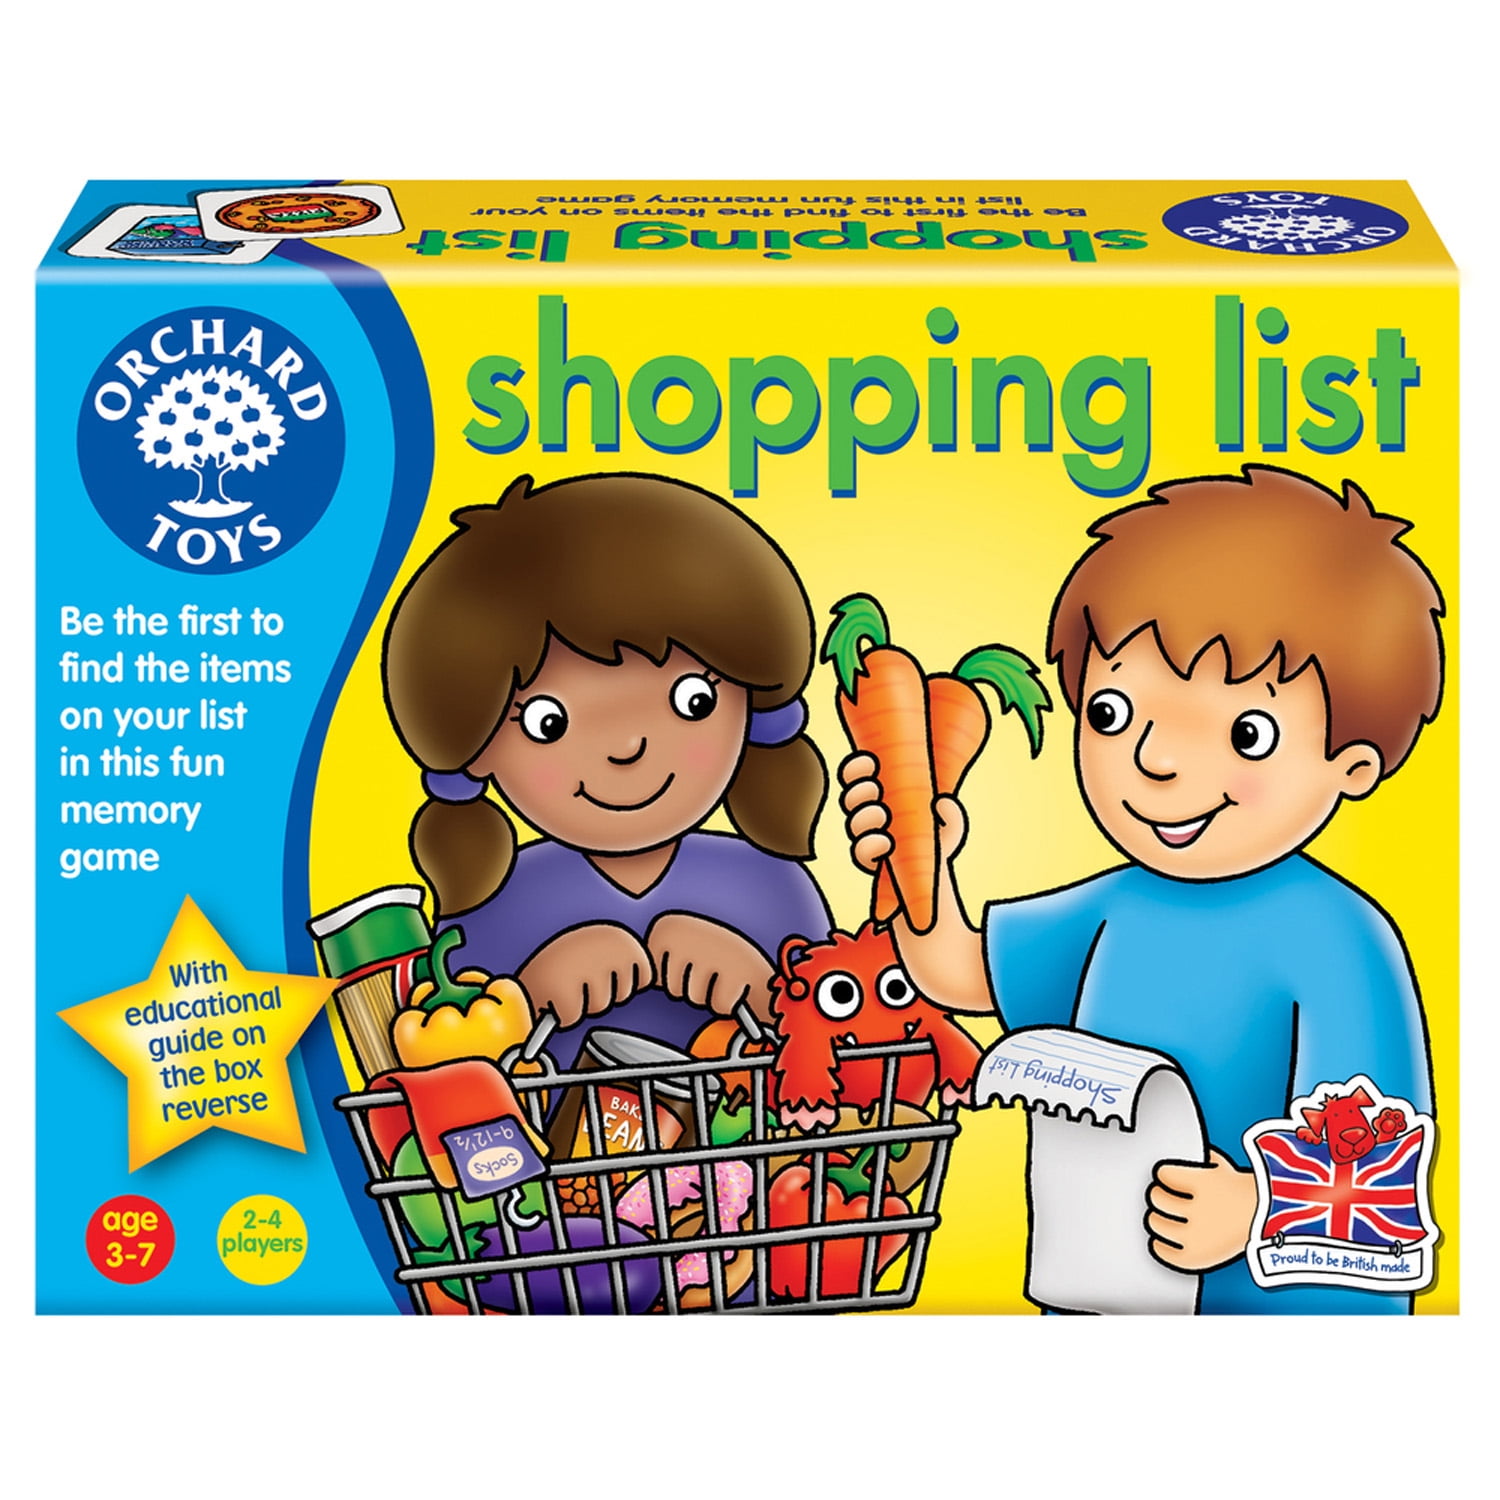 Orchard Toys 003 Shopping List Game 